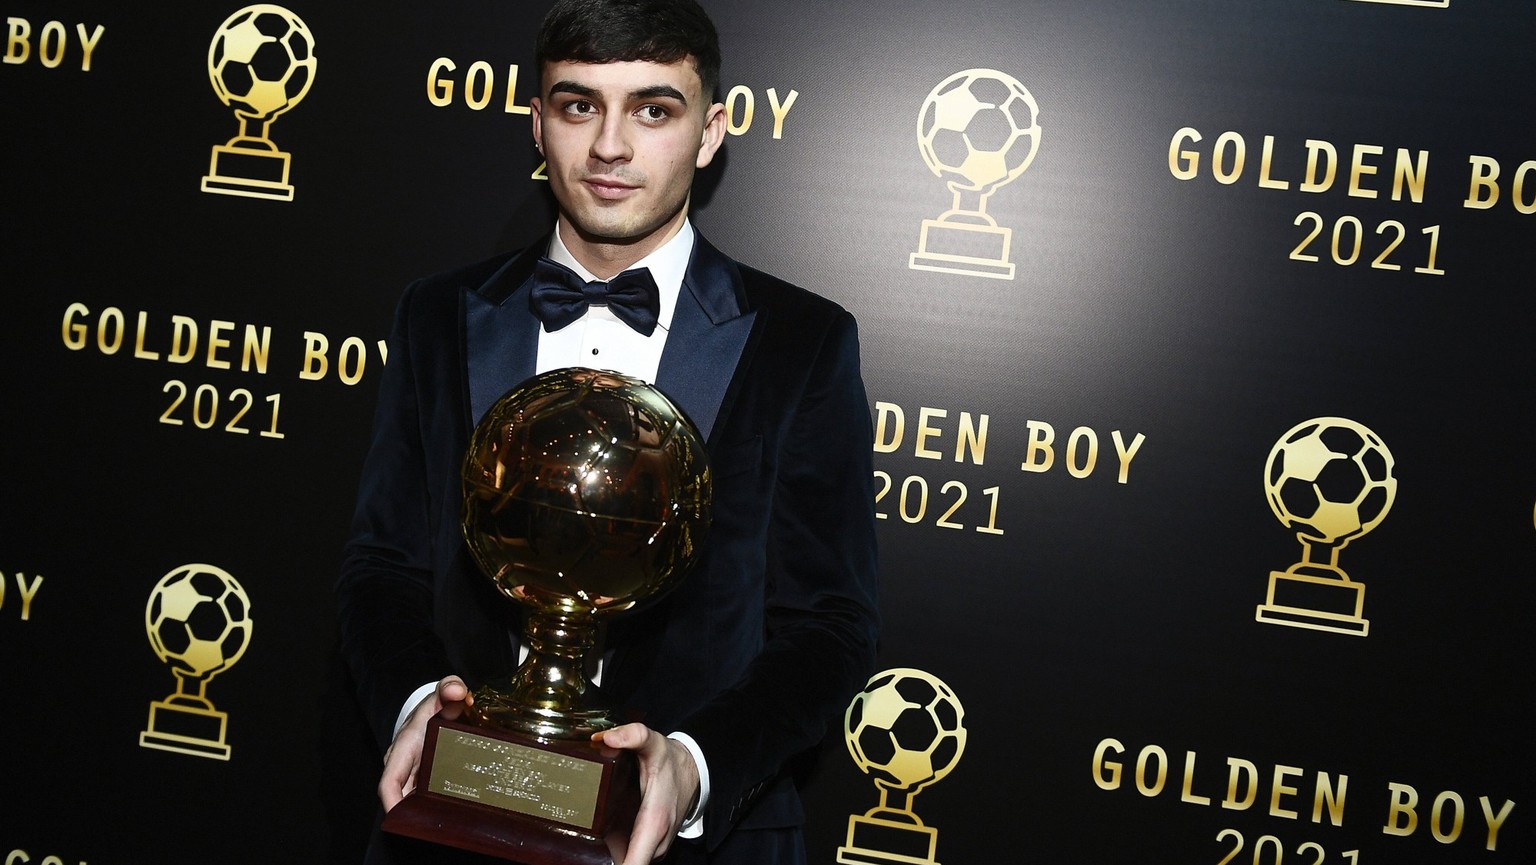 IMAGO / LaPresse

Photo LaPresse - Nicolo Campo December 13, 2021 Torino, Italy Soccer Golden Boy Awards 2010 - The Award as the best Under-21 in Europe by Tuttosport In the pic: Pedri PUBLICATIONxNOT ...